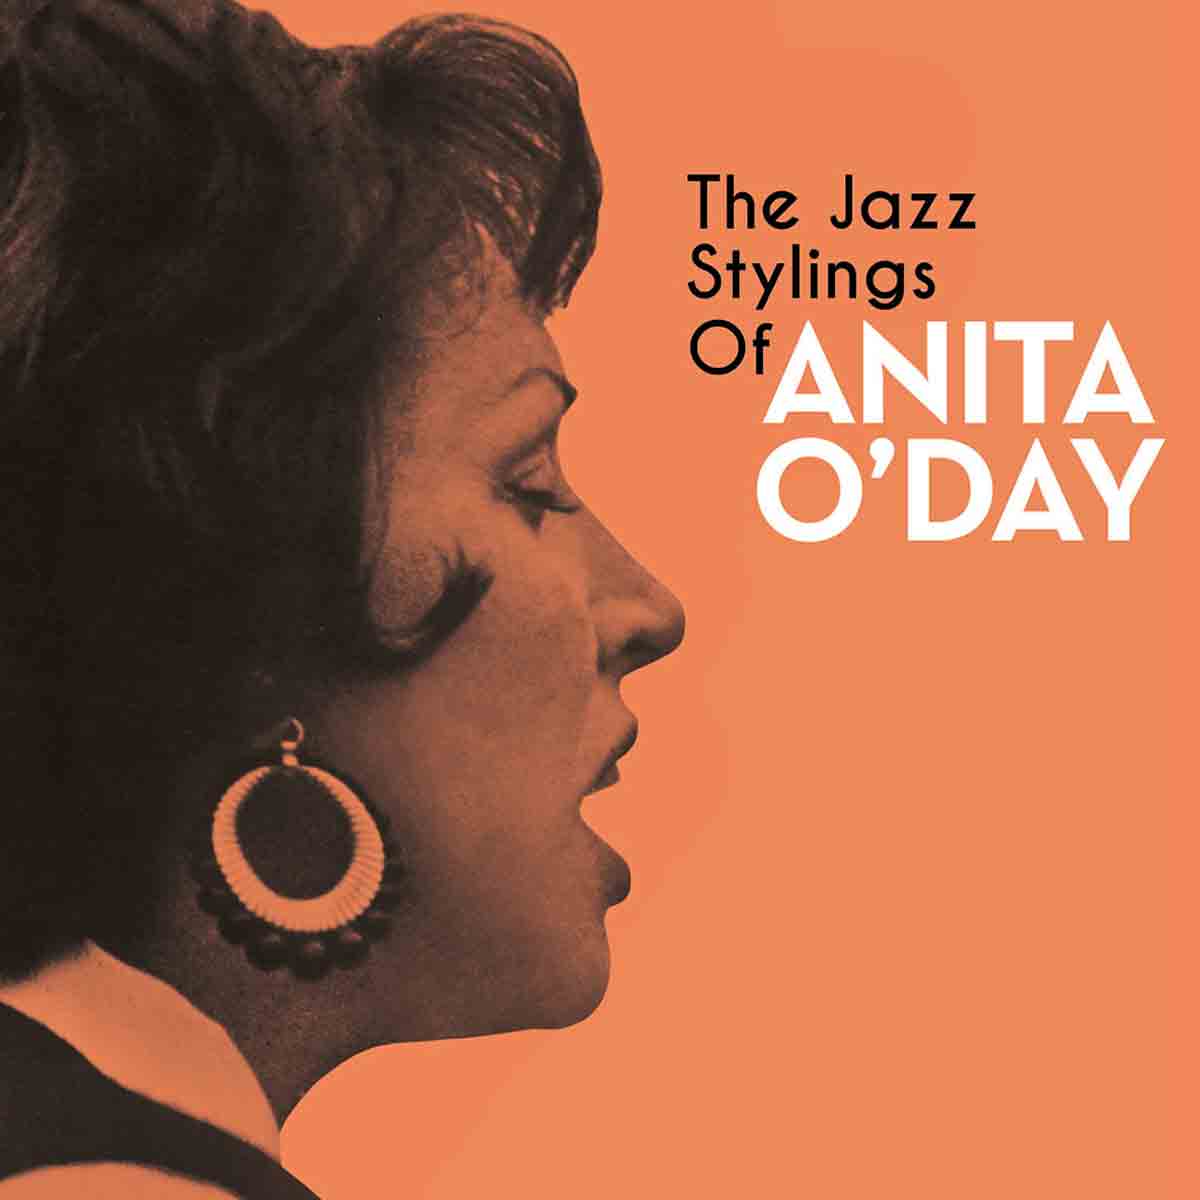 The Jazz Stylings of Anita O' Day